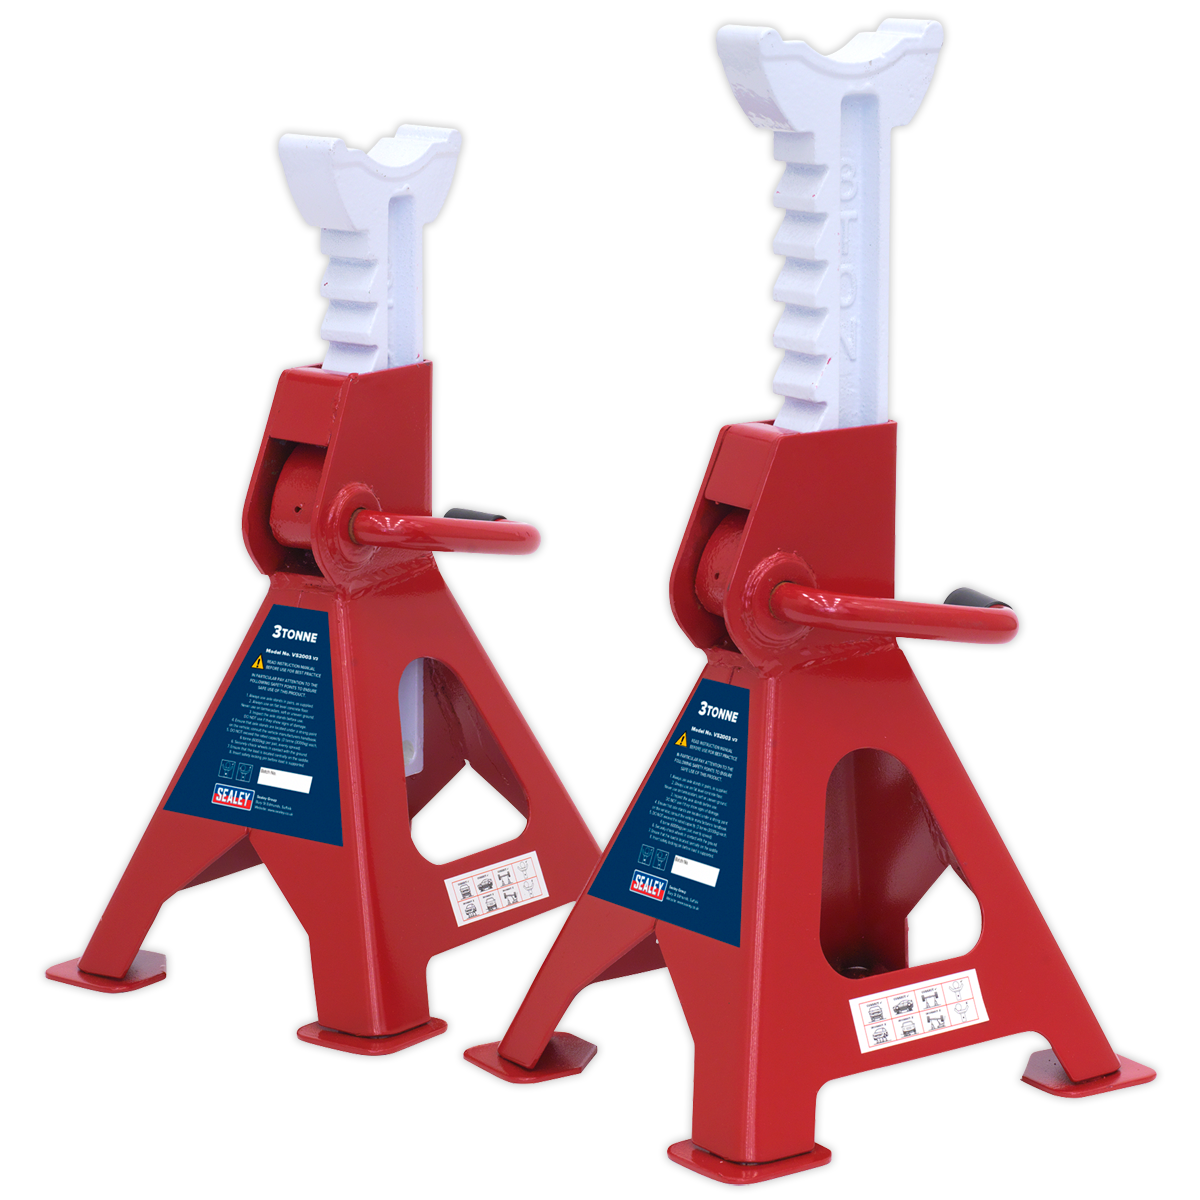 Sealey VS2003 Axle Stands (Pair) 3tonne Capacity per Stand Ratchet Type